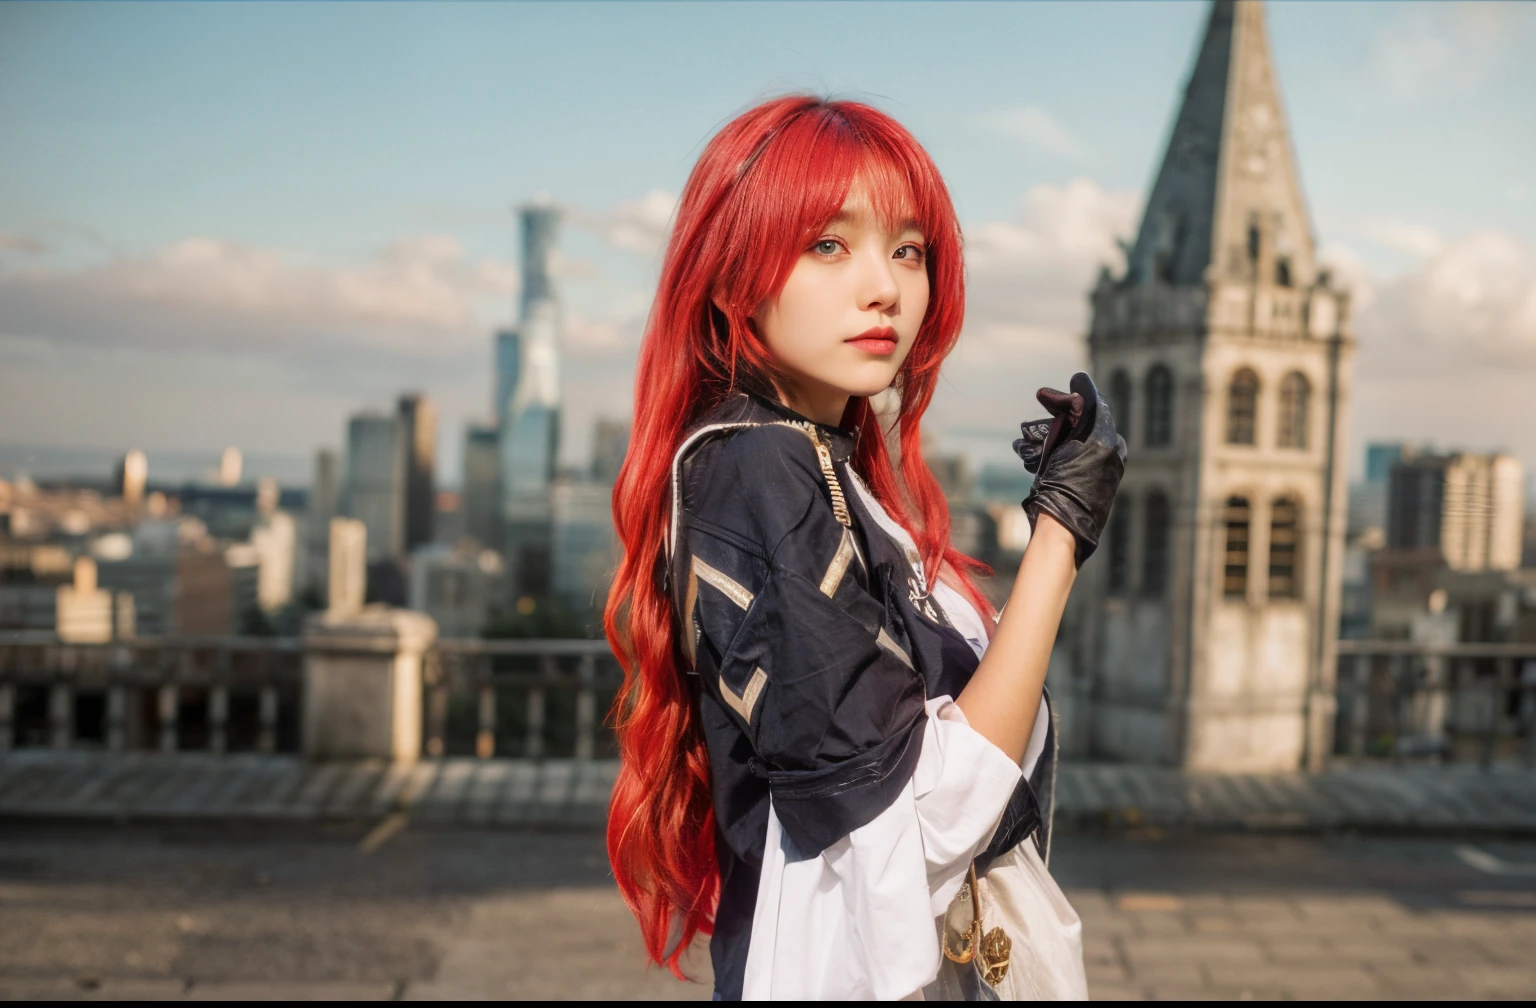 She stood on the street, her black and white outfit contrasting with the gold accents on her gloves, headband, and shoes. Her long red hair flowed behind her, catching the light of the setting sun. She looked away from the camera, as if she was waiting for someone or something to appear. Behind her, the city rose in a gothic style, with spires, arches, and gargoyles. The city was a mixture of old and new, with ancient buildings and modern skyscrapers. She wondered what secrets the city held, and what adventures awaited her.